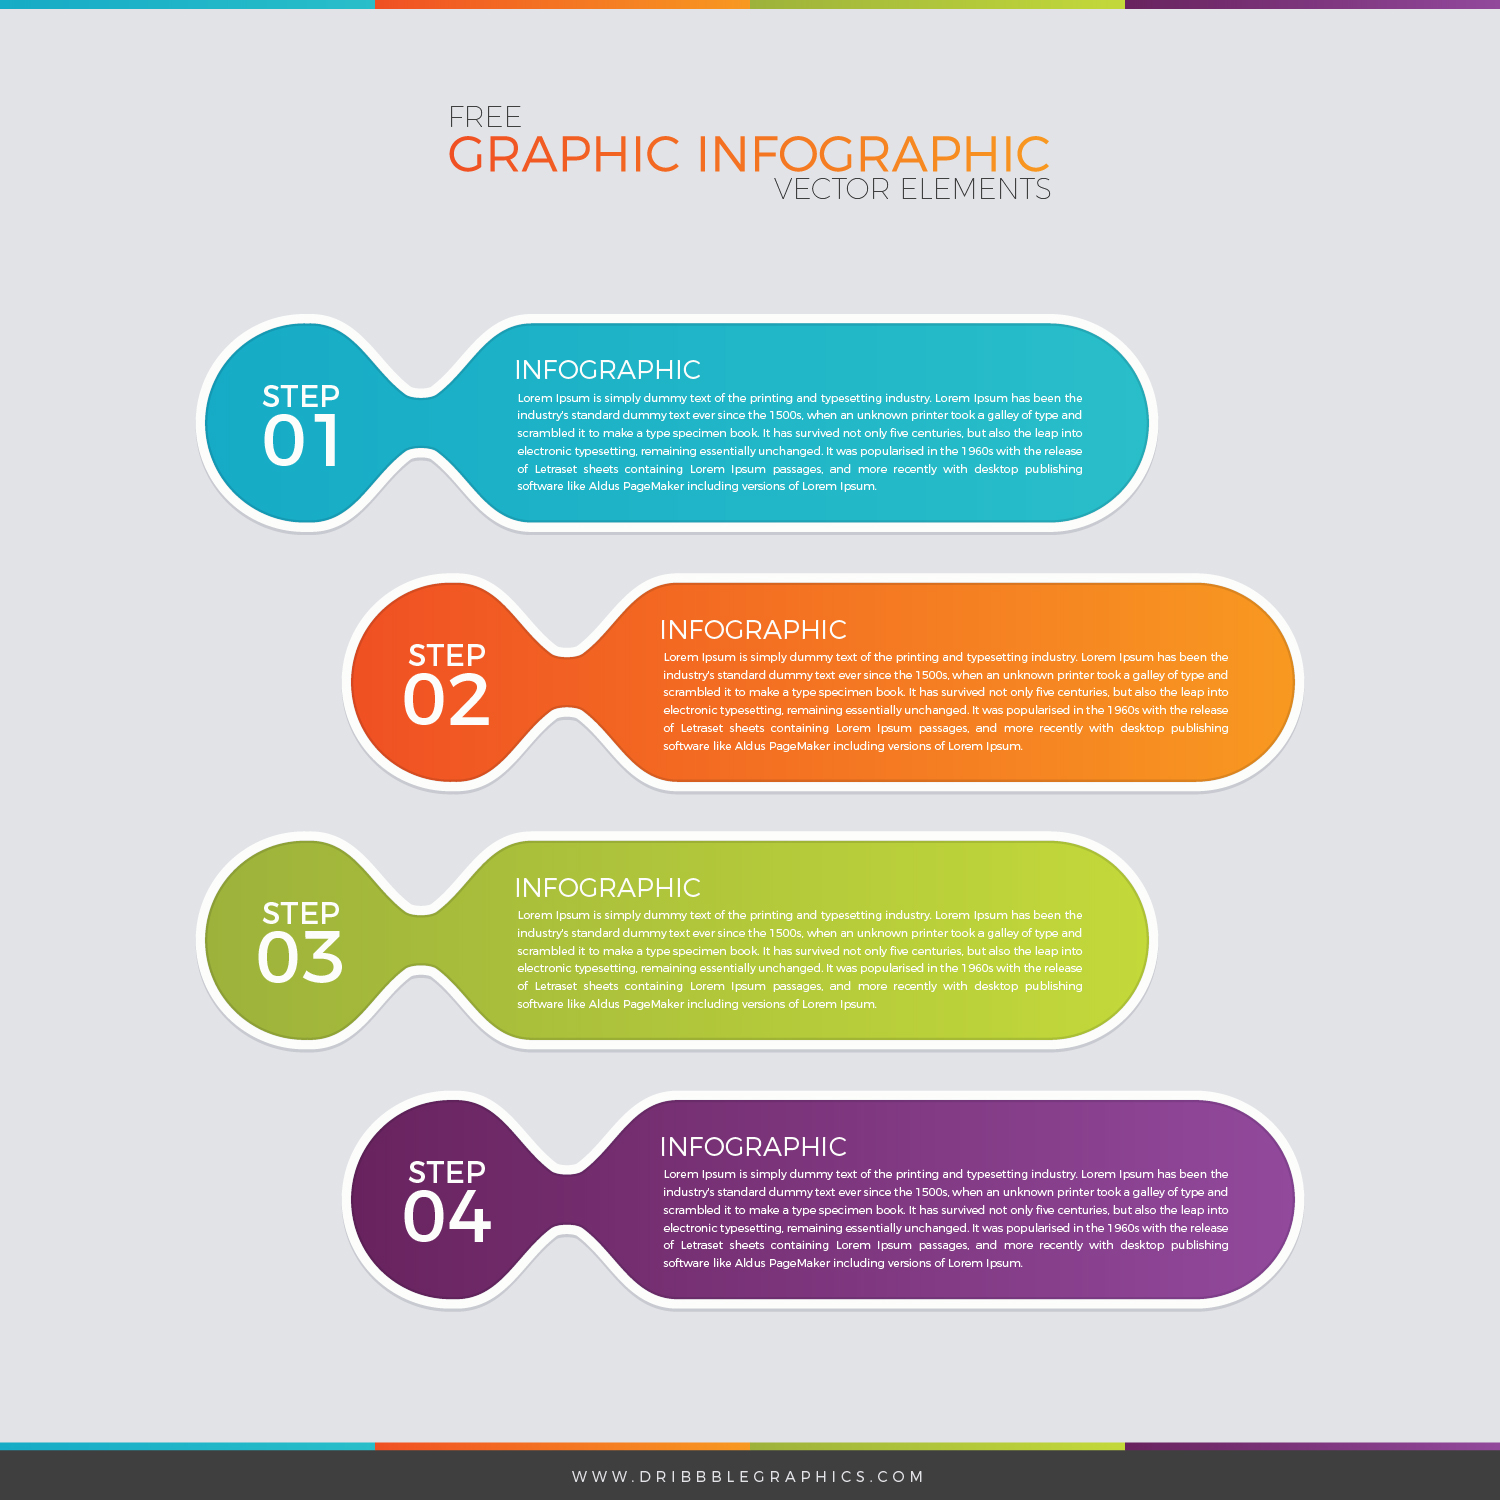 Free Graphic Infographic Vector Elements-01